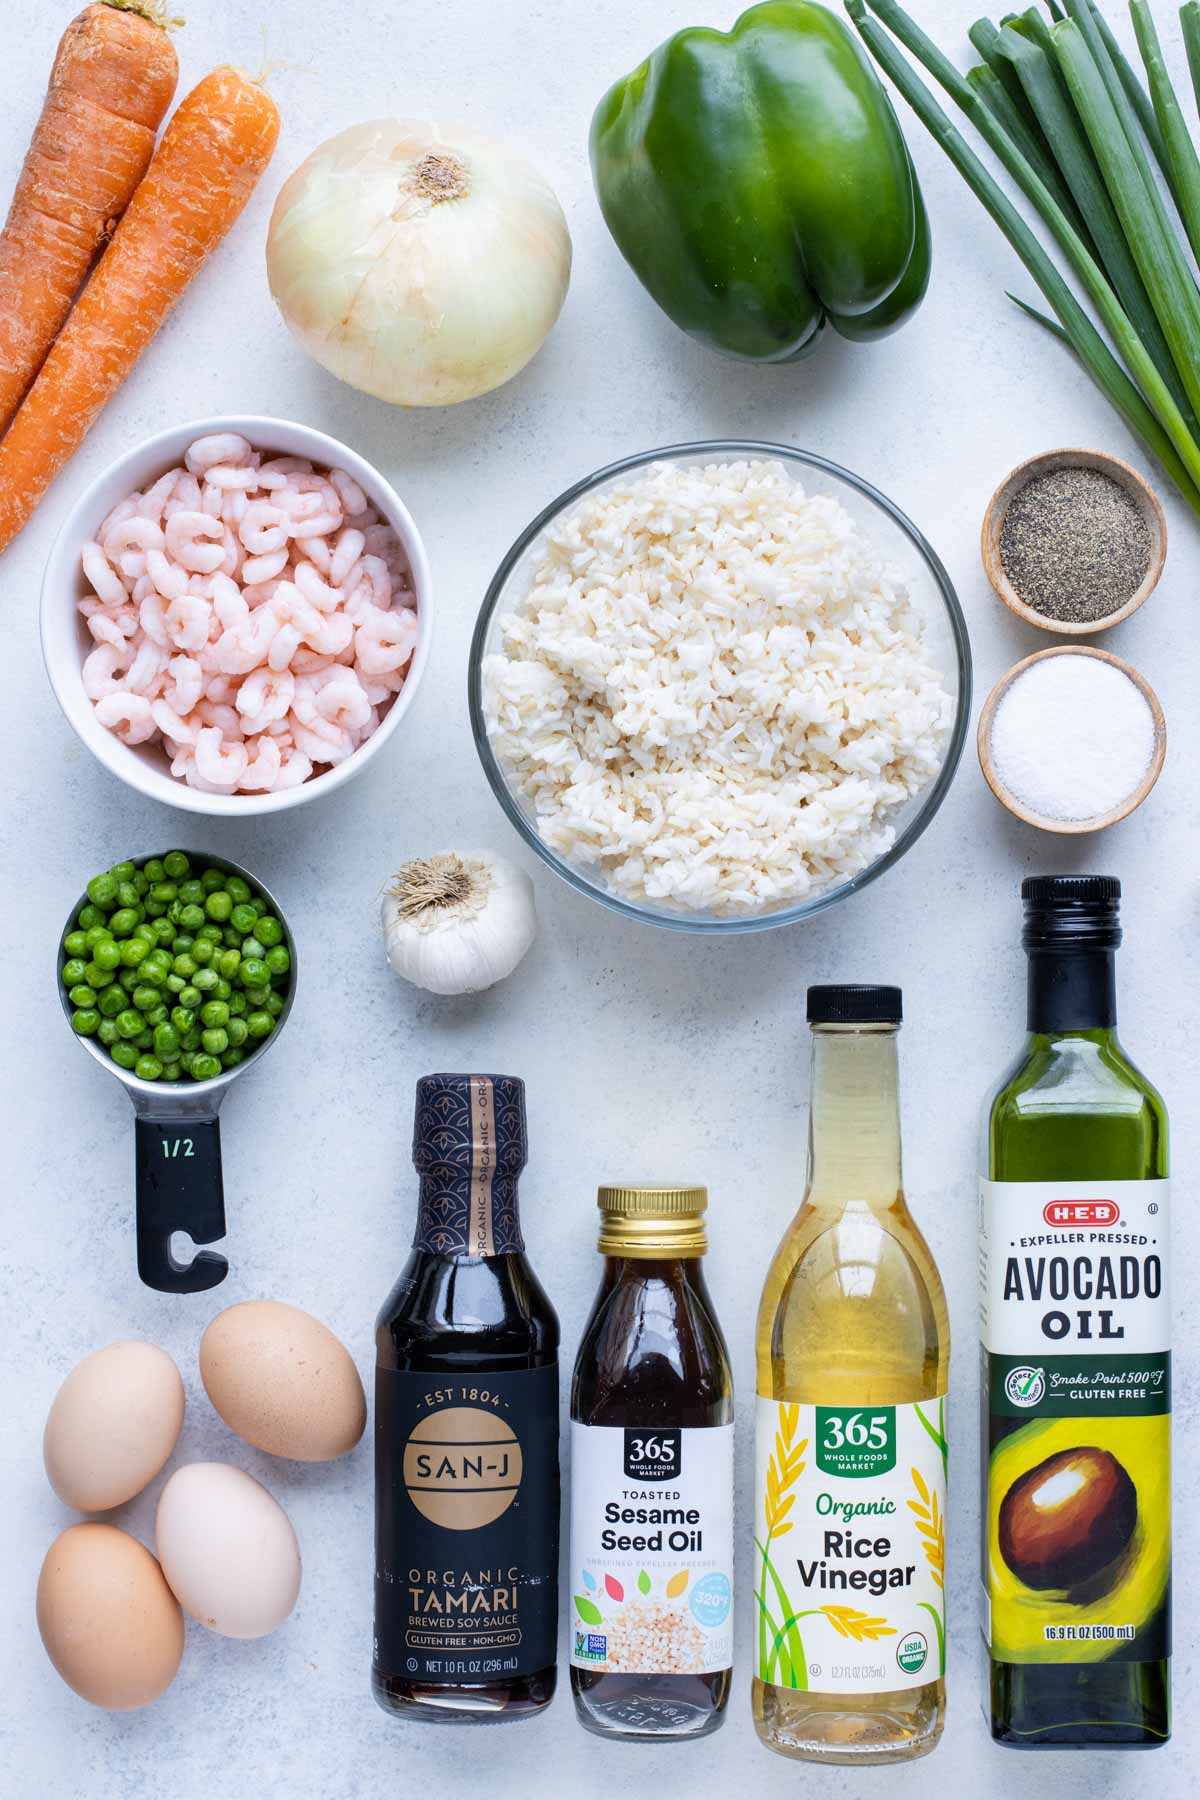 Shrimp, rice, peas, ball peppers, carrots, onion, garlic, egg, seasonings, green onions, oil, rice vinegar, and soy sauce are the ingredients for this recip.